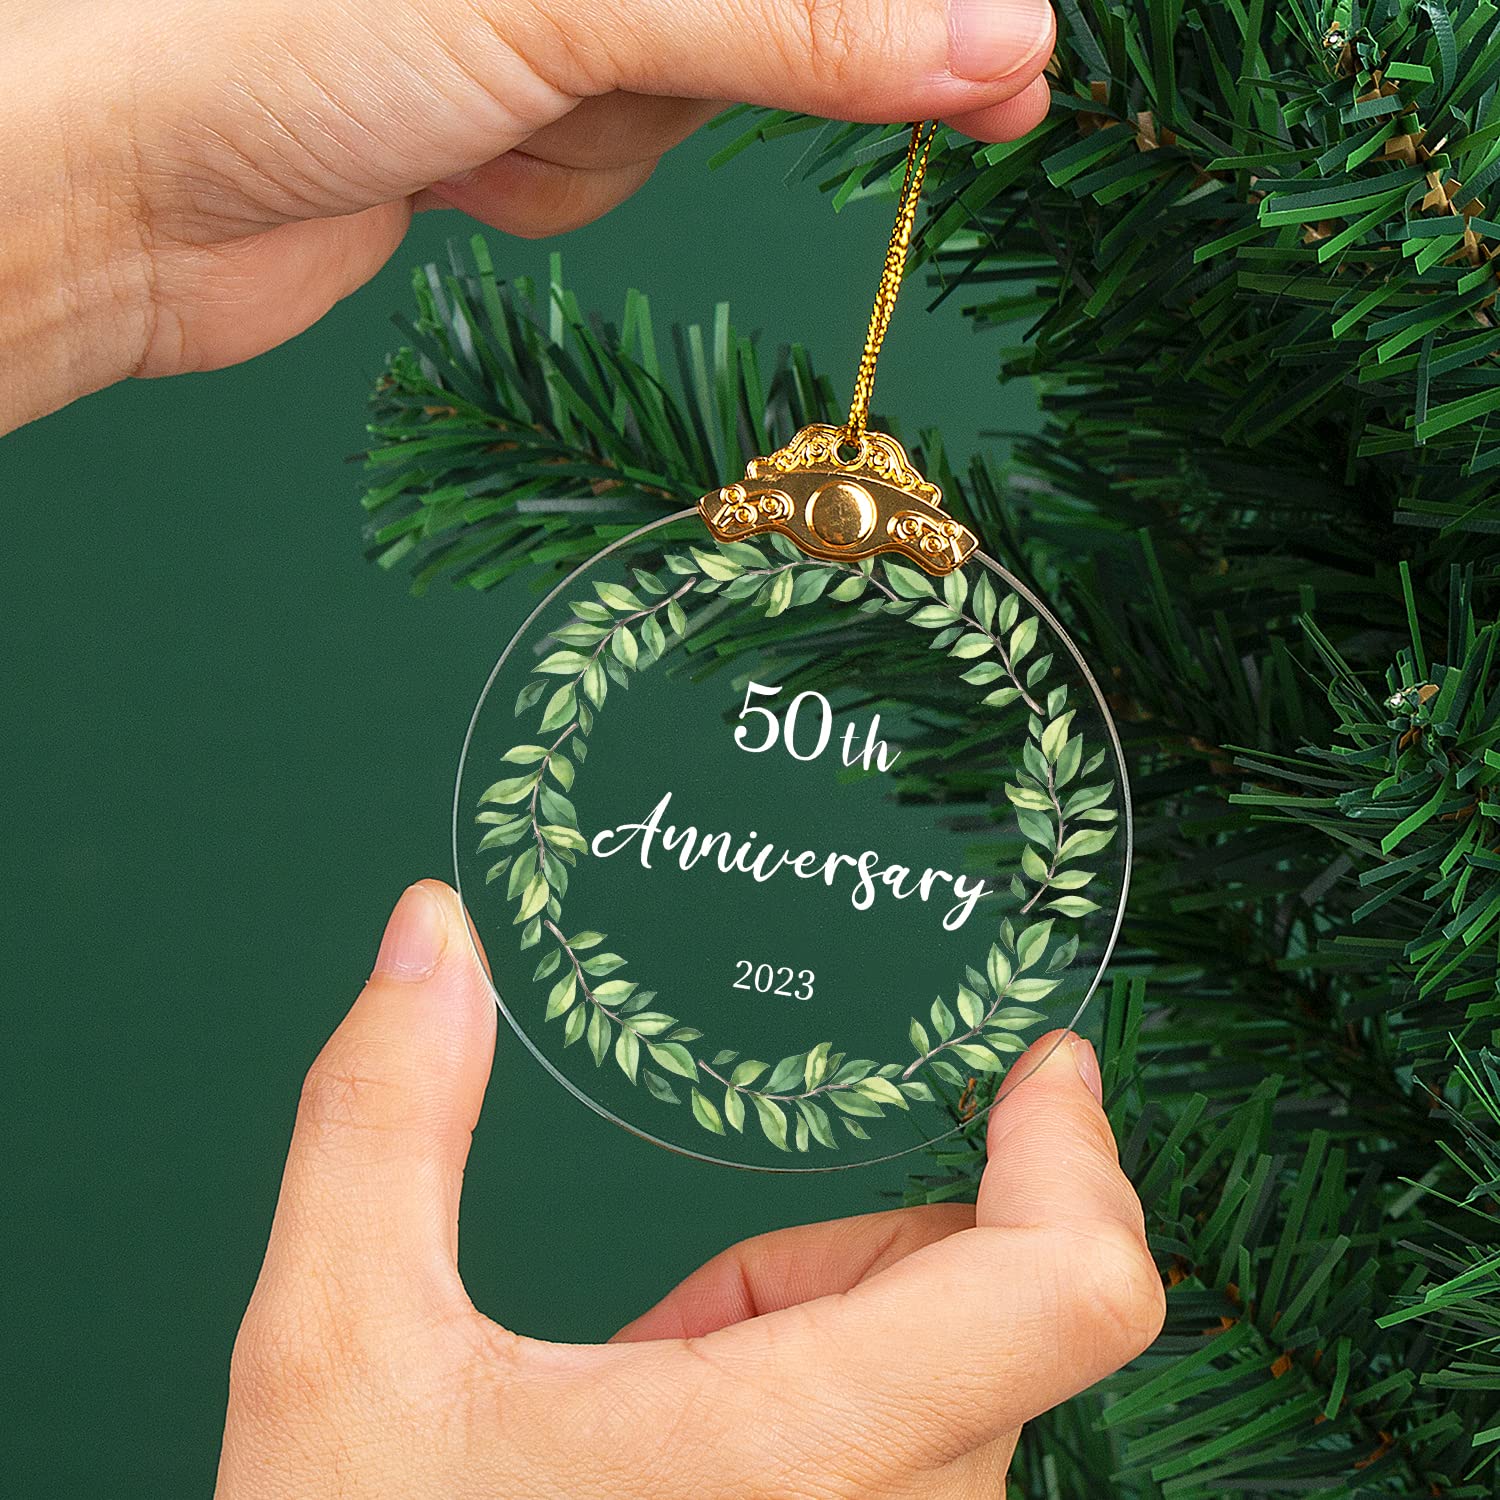 50 Years As Mr. & Mrs. Christmas Glass Ornament 2023 - Christmas Ornament Gift for Fifty 50 Years Couple Husband & Wife Married - Holiday Decoration Gift for 50th Wedding Anniversary - (50 Years)